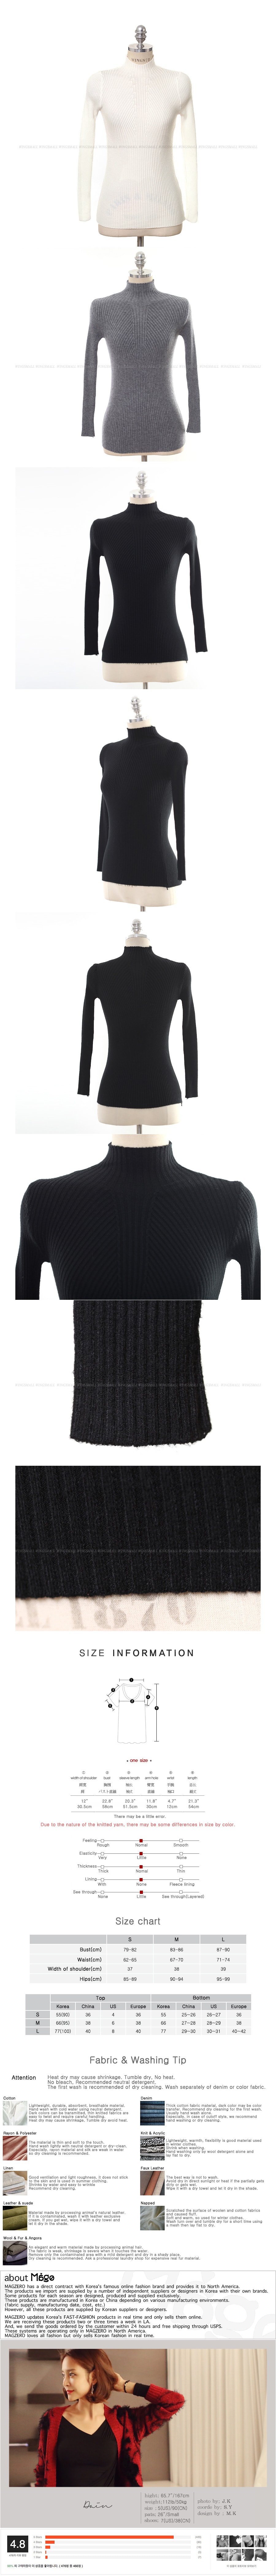 KOREA Mock Neck Stretchy Ribbed Knit Top Charcoal One Size(S-M) [Free Shipping]